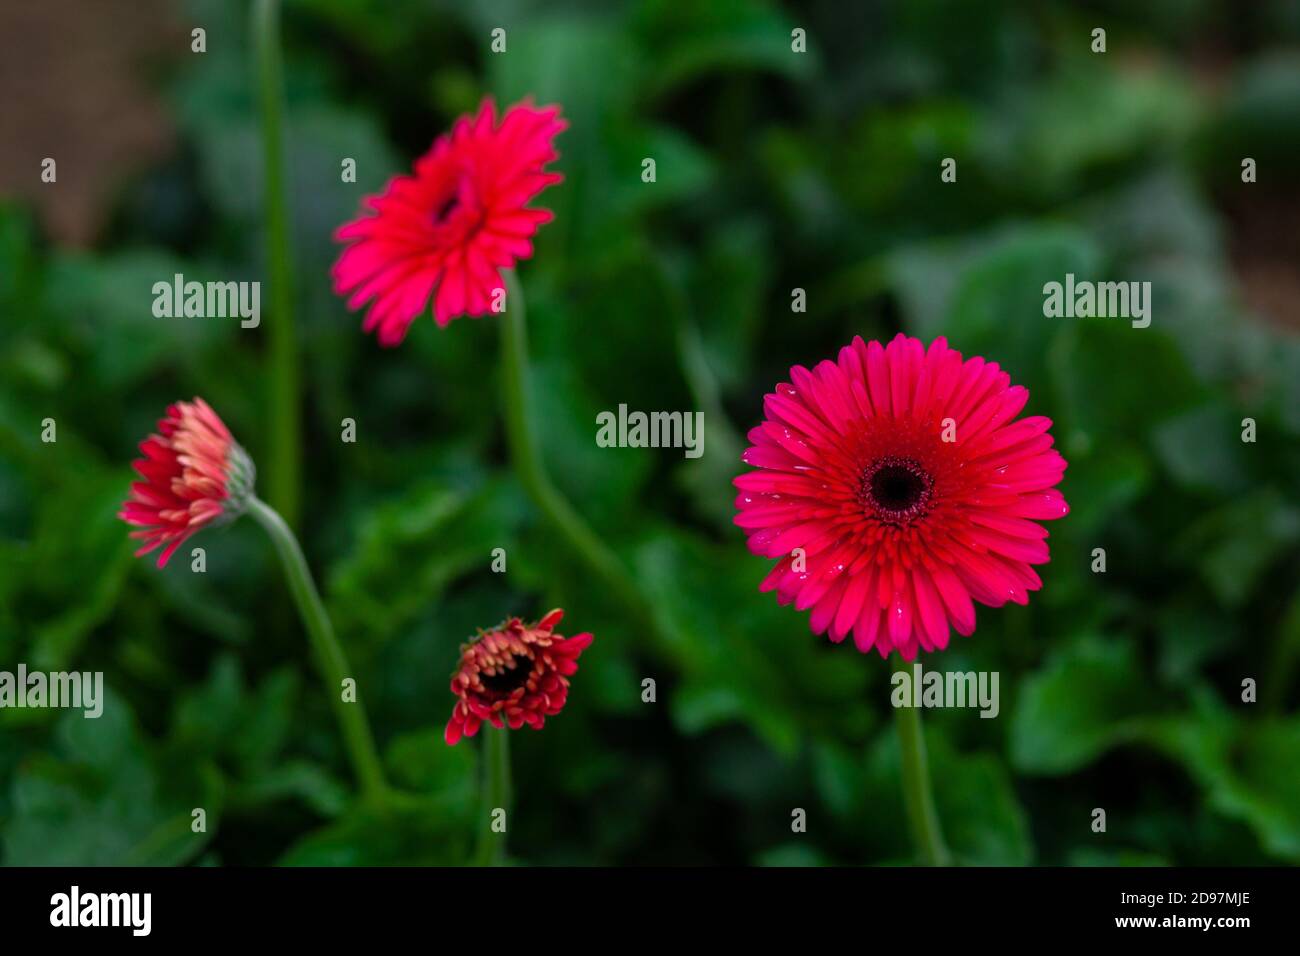 Magenta Color High Resolution Stock Photography and Images - Alamy